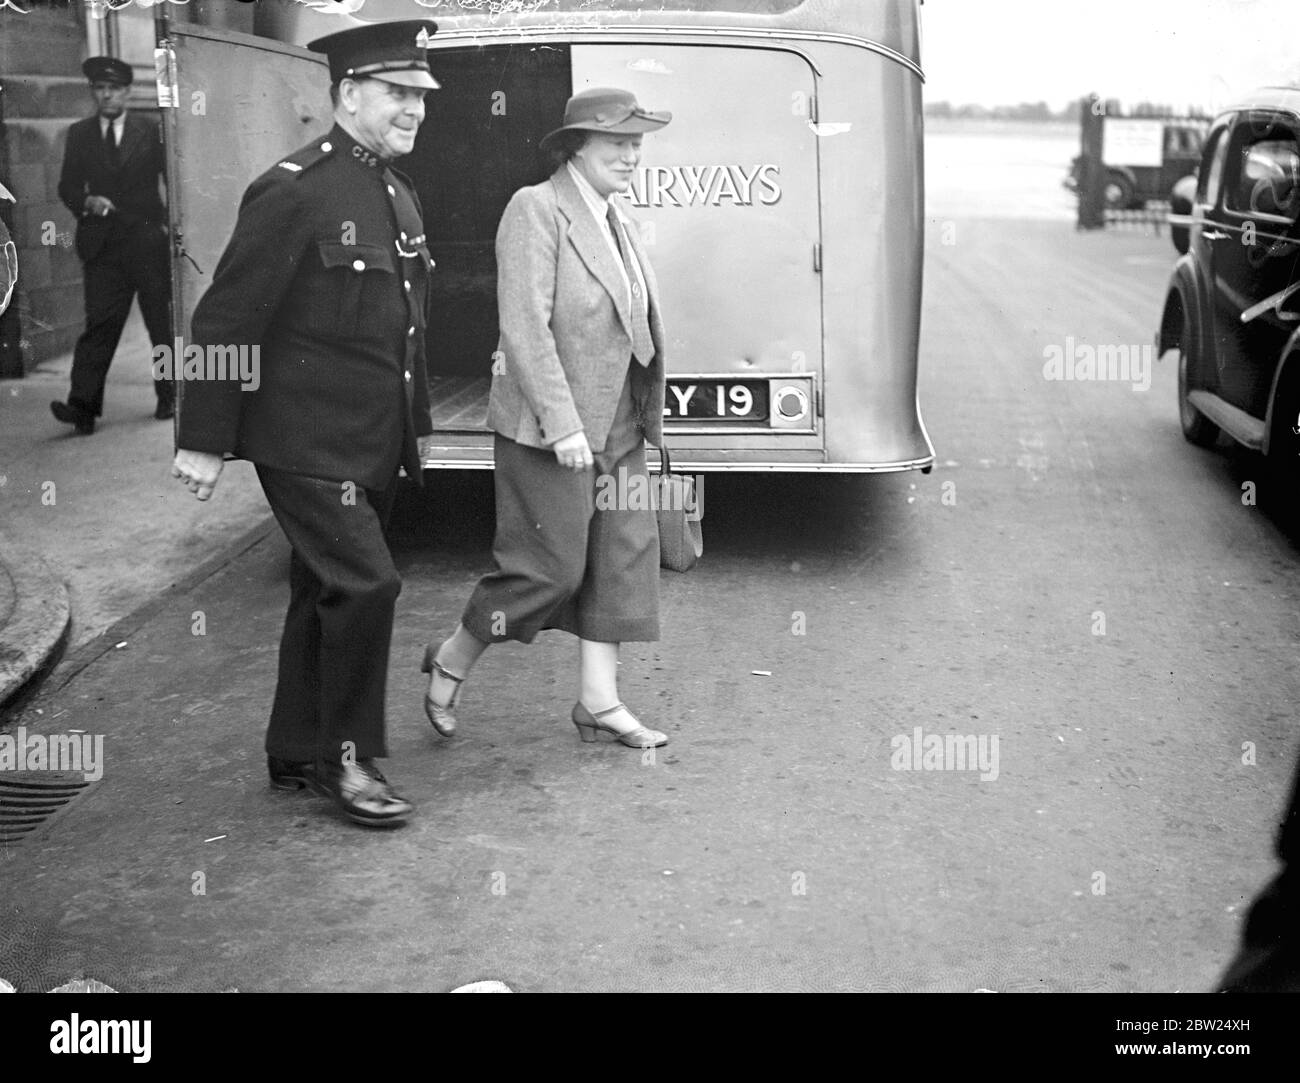 Mrs Kendrick arrives home with Captain Kendrick are to his release by the Gestapo. Capt Thomas Kendrick, the British Passport Control Officer in Vienna, who was arrested by the German secret police and accused of 'espionage' arrived at Croydon Aerodrome, accompanied by his wife, following his release. They returned to England via Budapest. Photo shows, Mrs Frederik leaving Croydon airport after arriving with her husband. 22 August 1938 Stock Photo